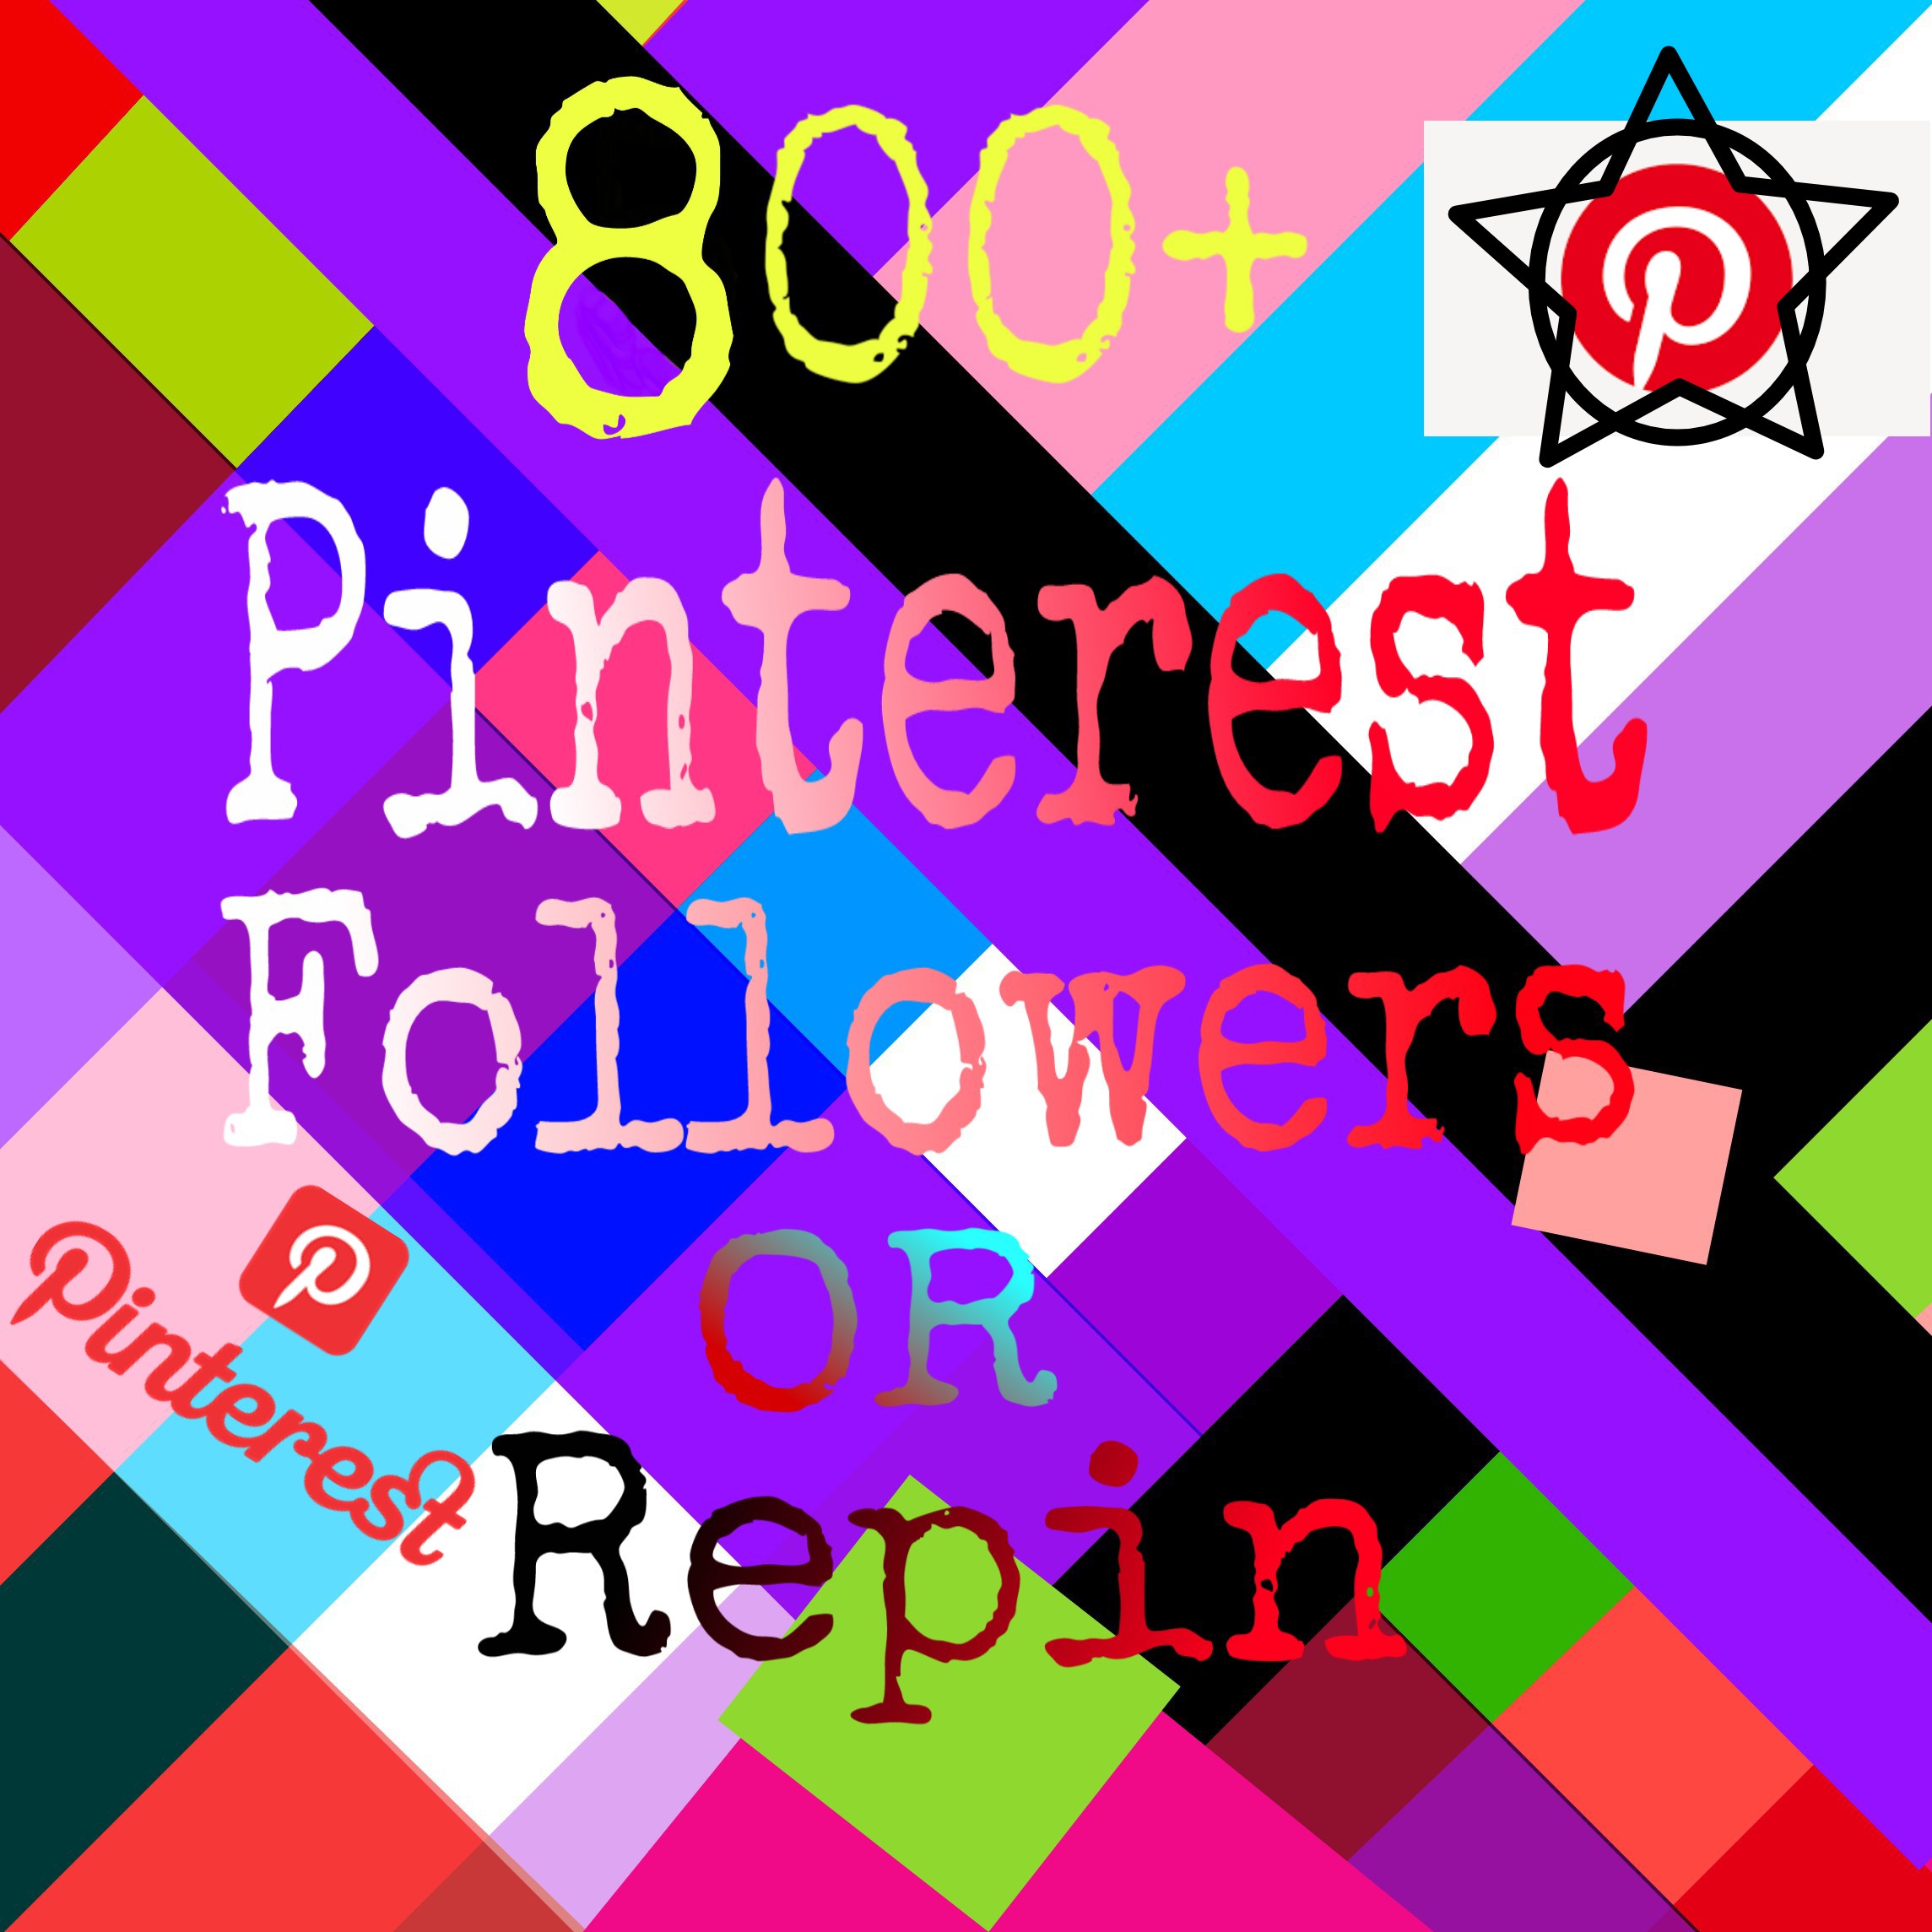 I will give you 800+ naturally grow world wide pinterest promotion fast delivery for $8